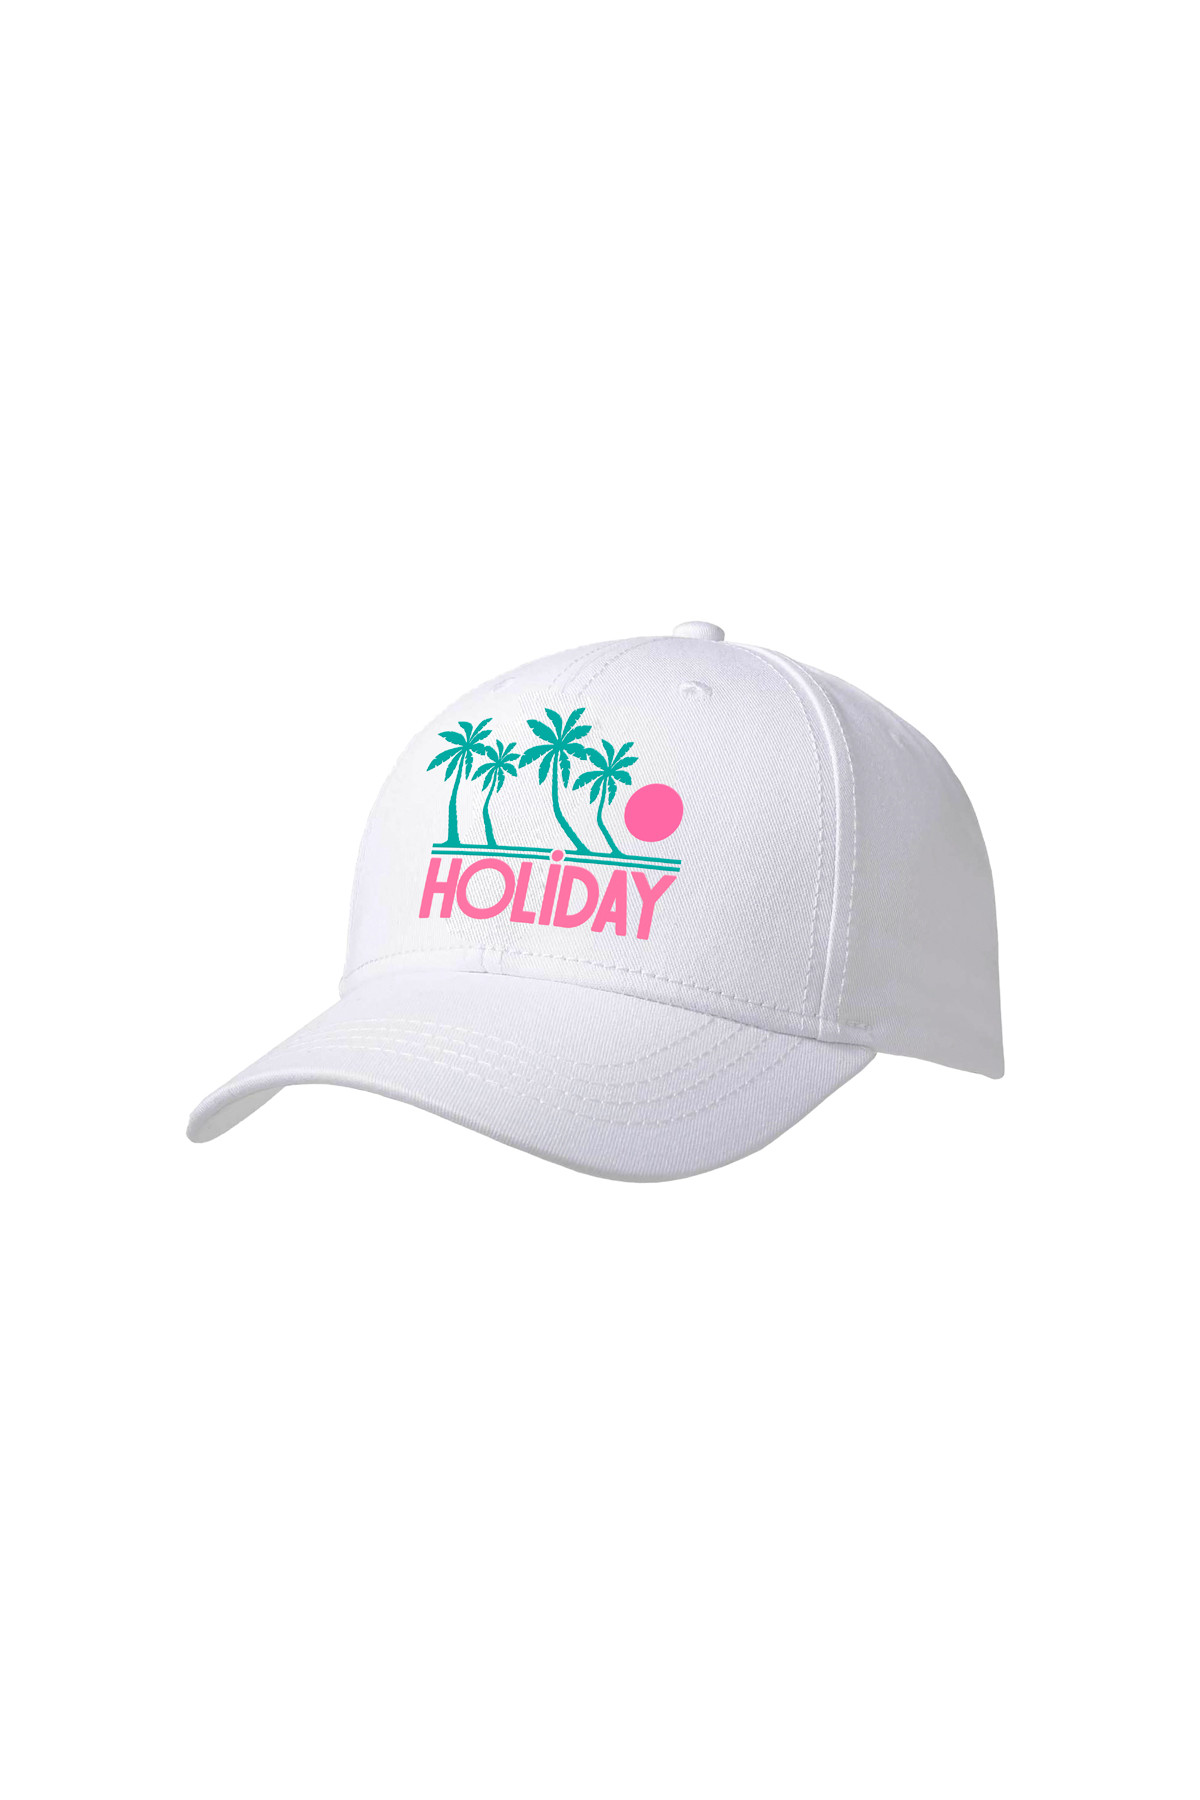 Photo de CASQUETTES Casquette HOLIDAY chez French Disorder